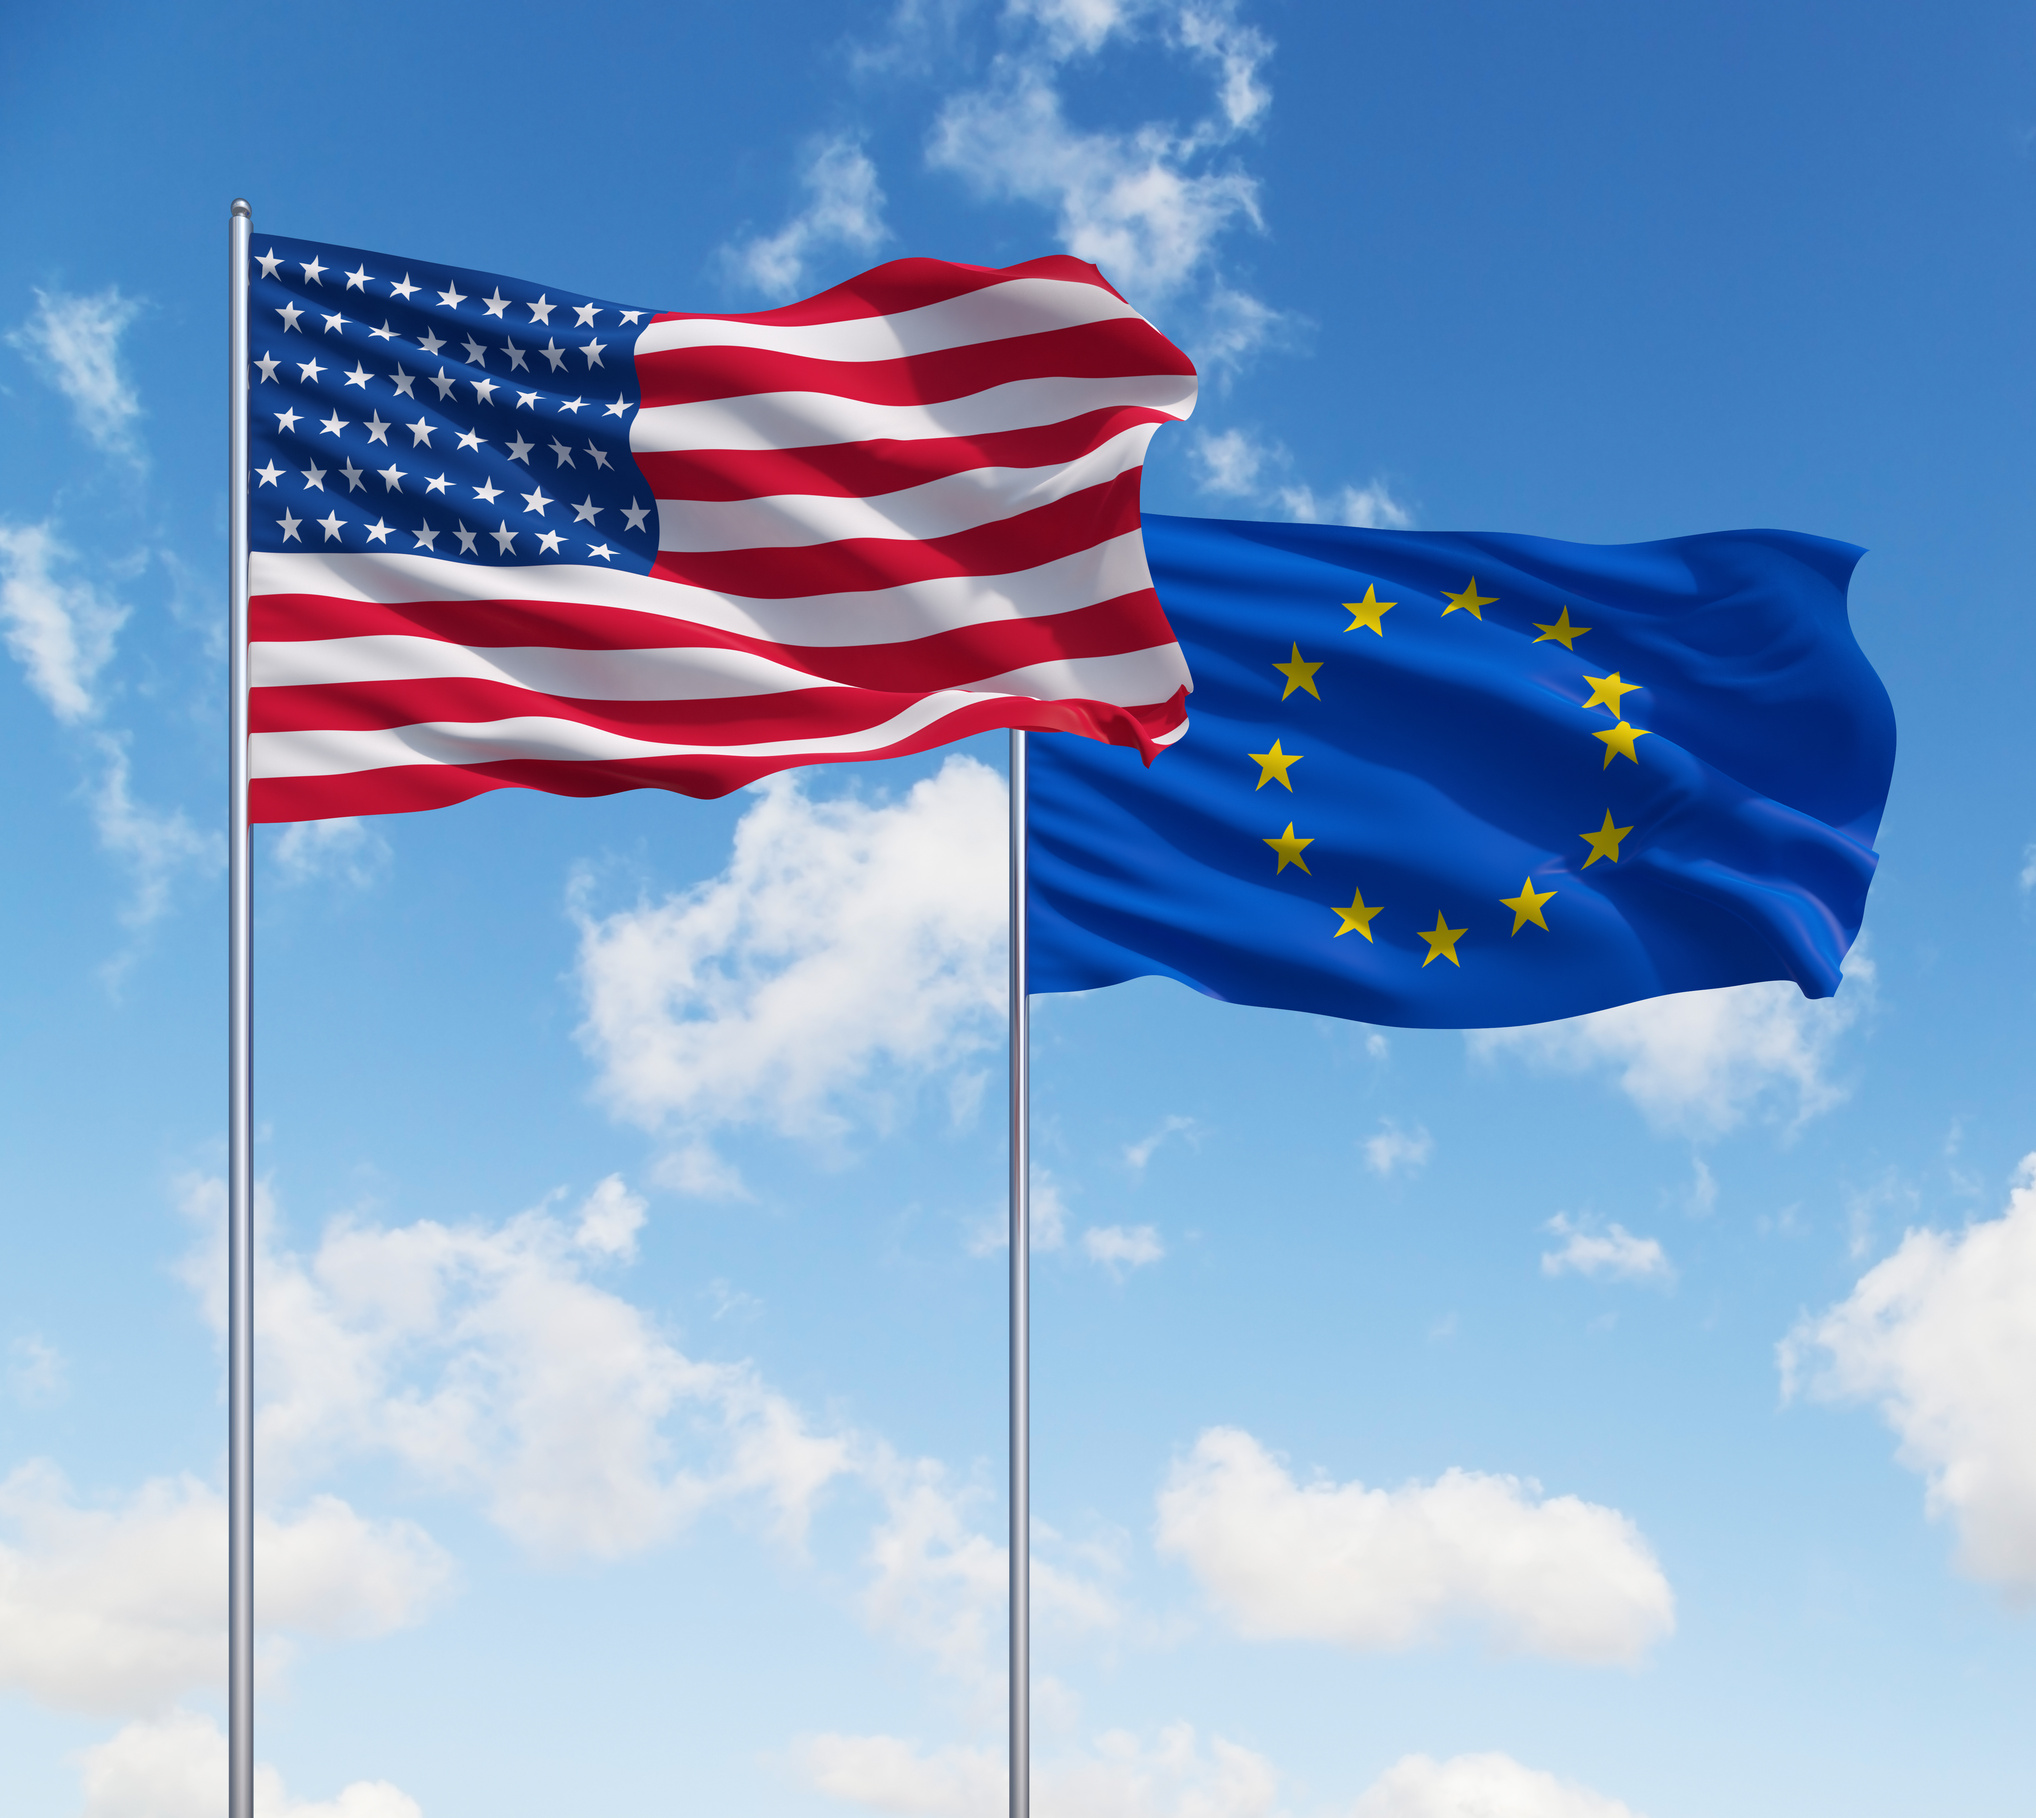 flag of the European Union and flag of the USA